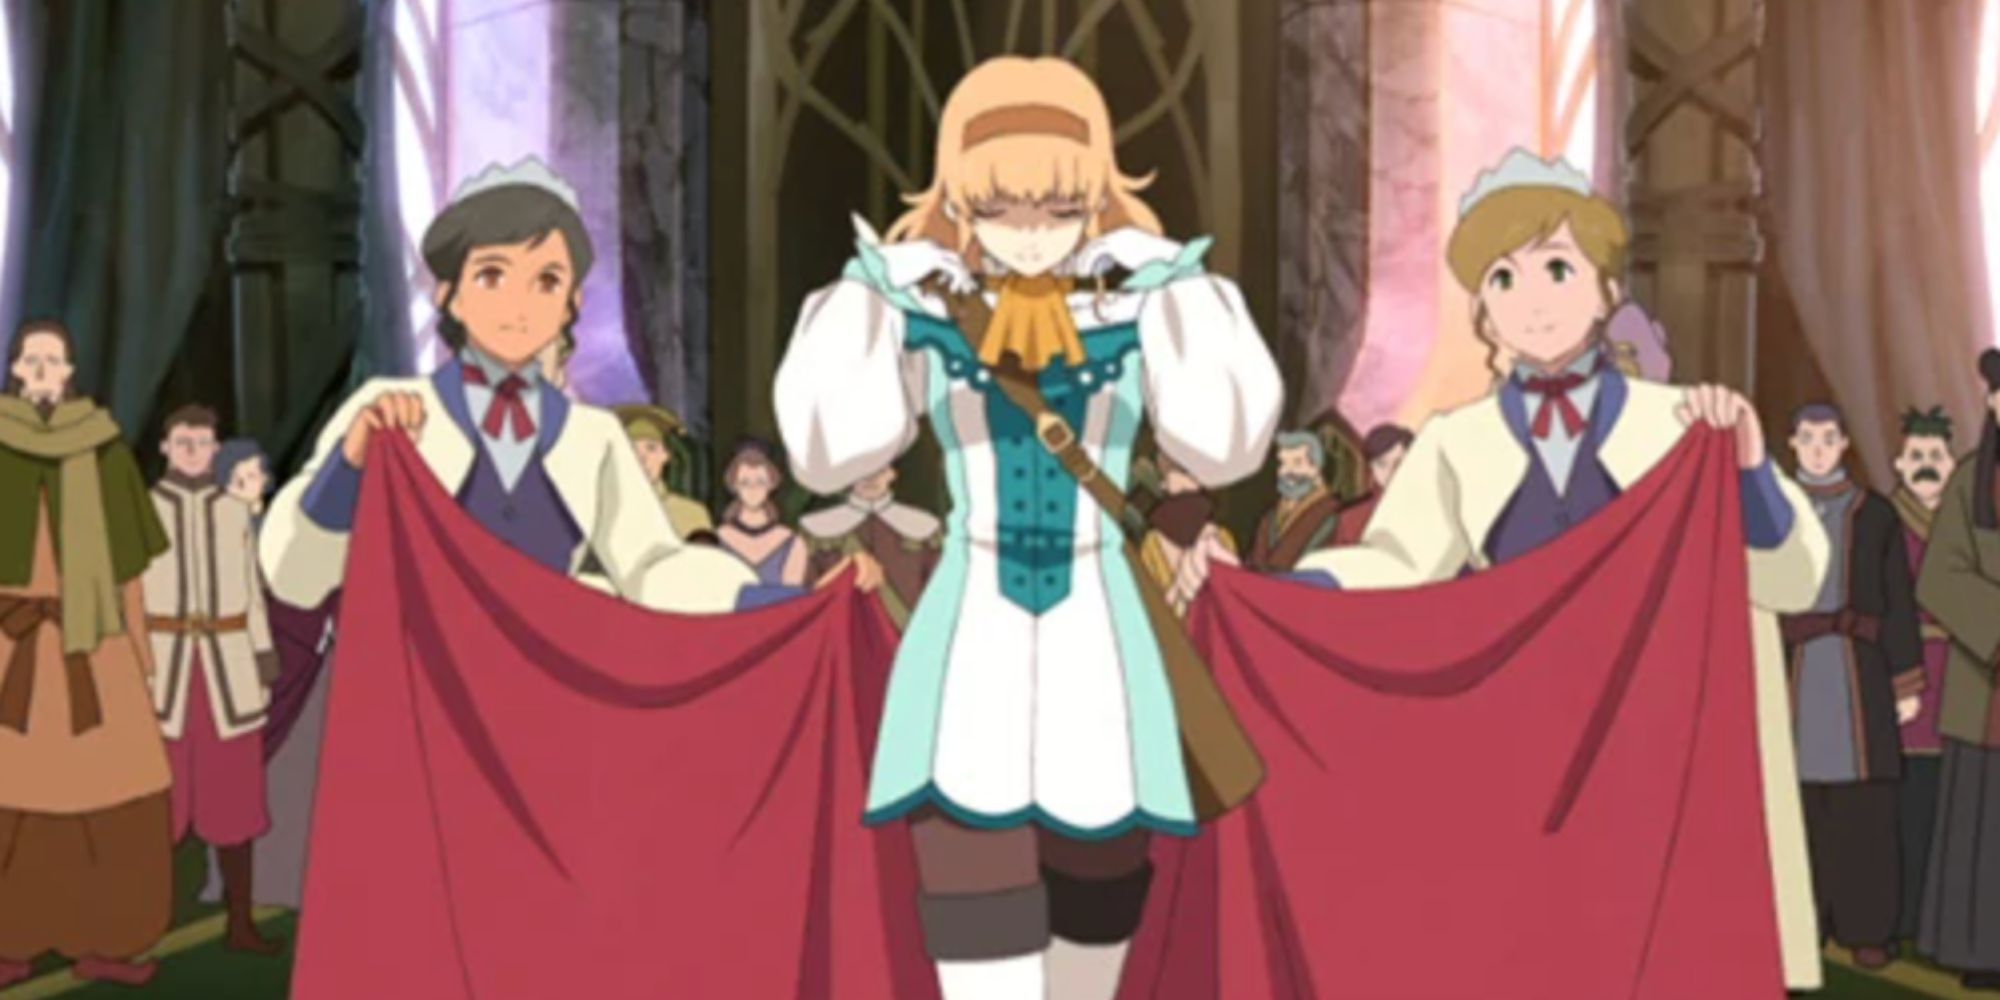 Tales of the Abyss - Natalia having her hood taken off by two maids